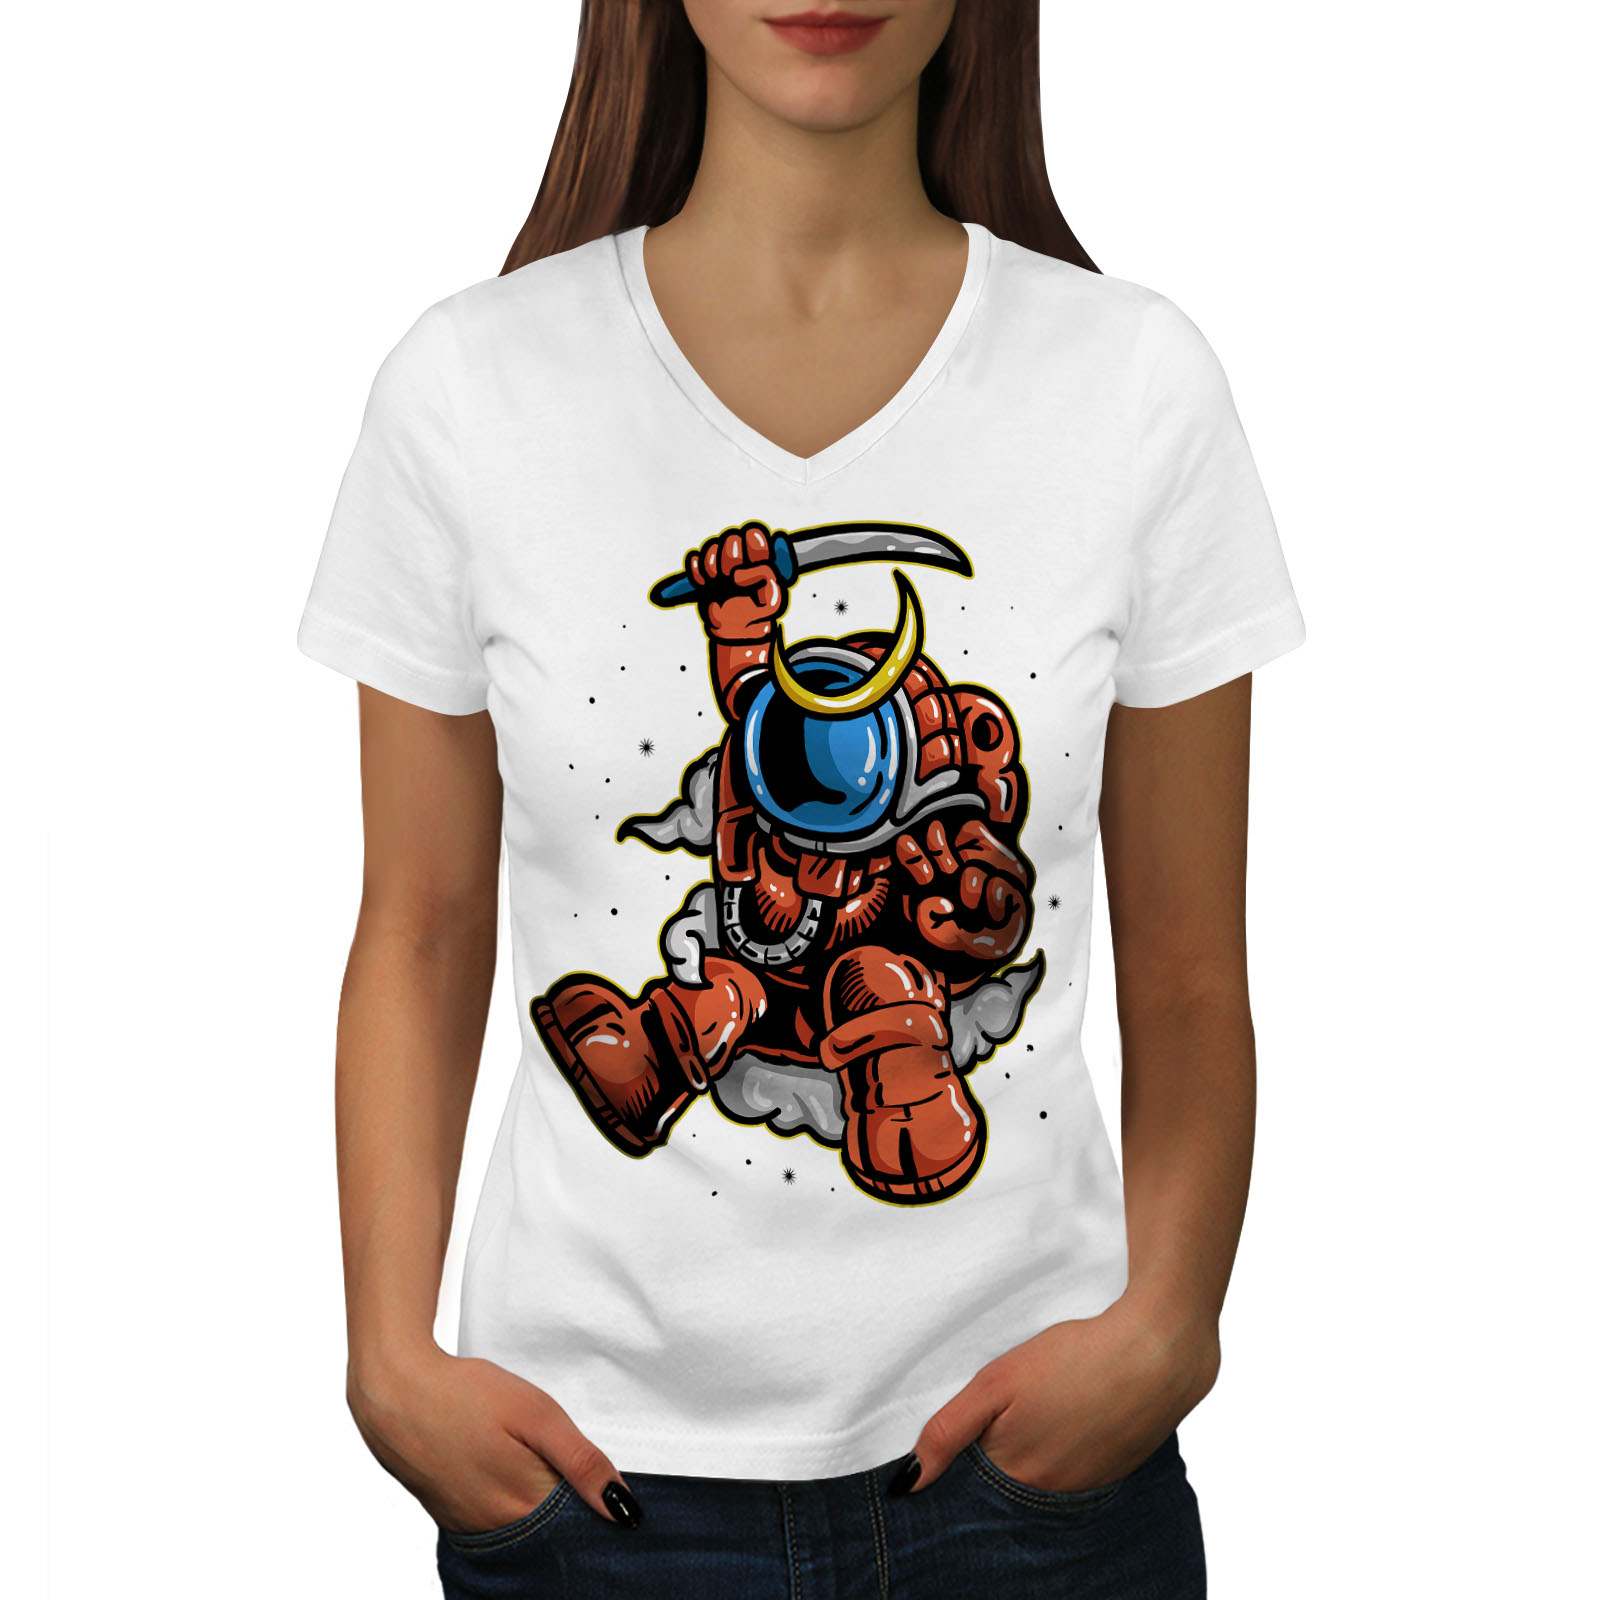 Wellcoda Space Invaders Womens V-Neck T-shirt, Cosmos Graphic Design ...